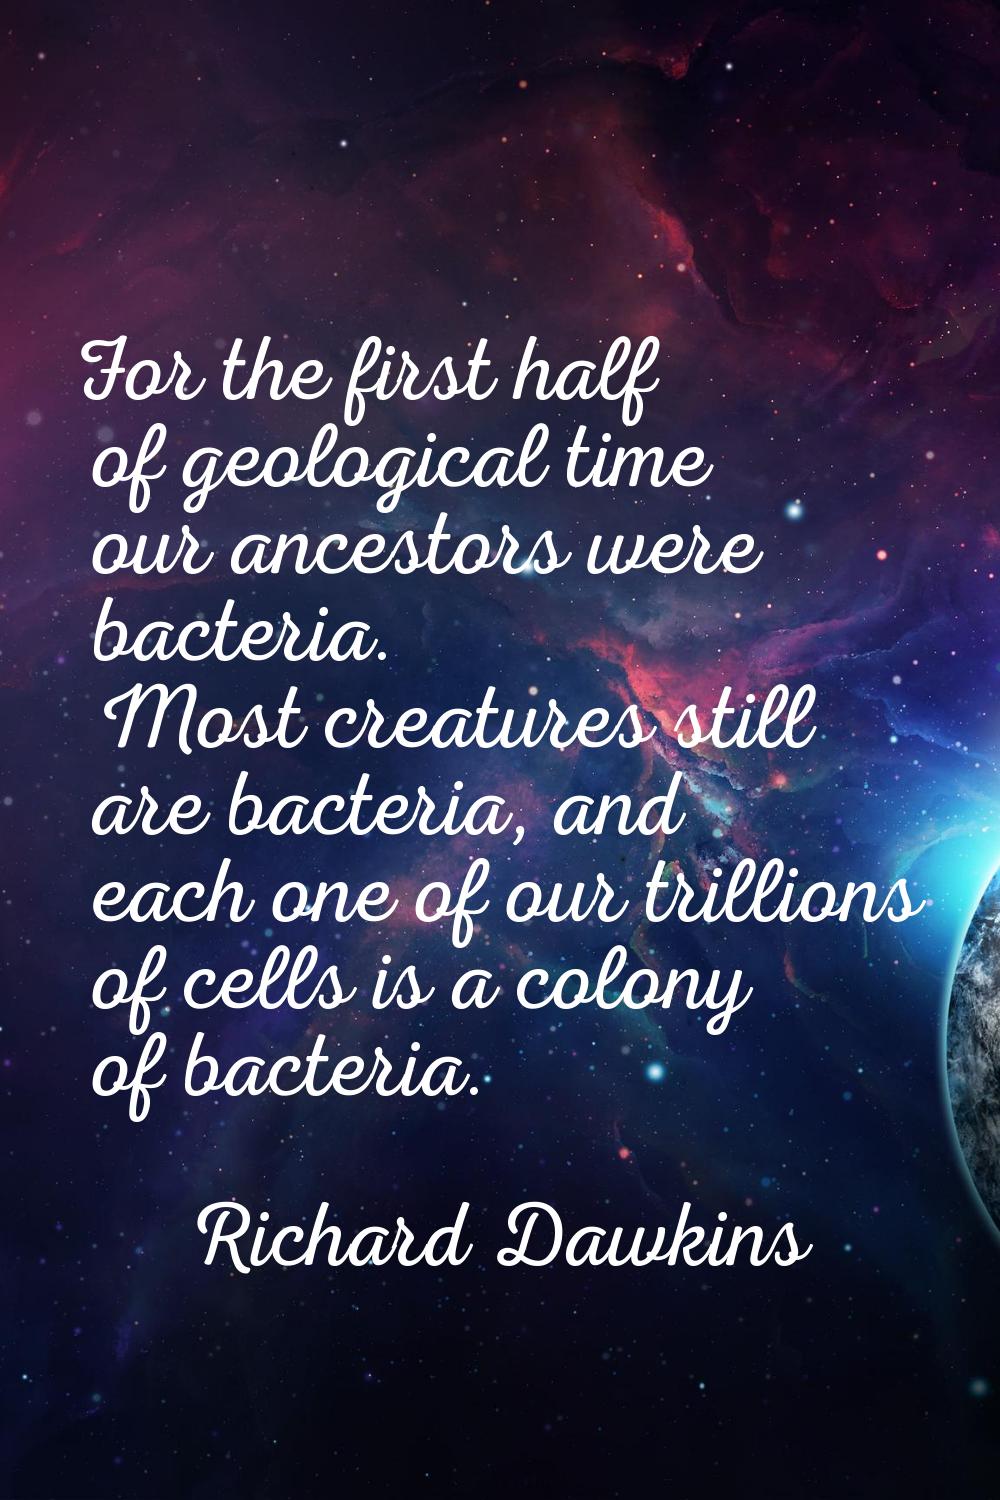 For the first half of geological time our ancestors were bacteria. Most creatures still are bacteri